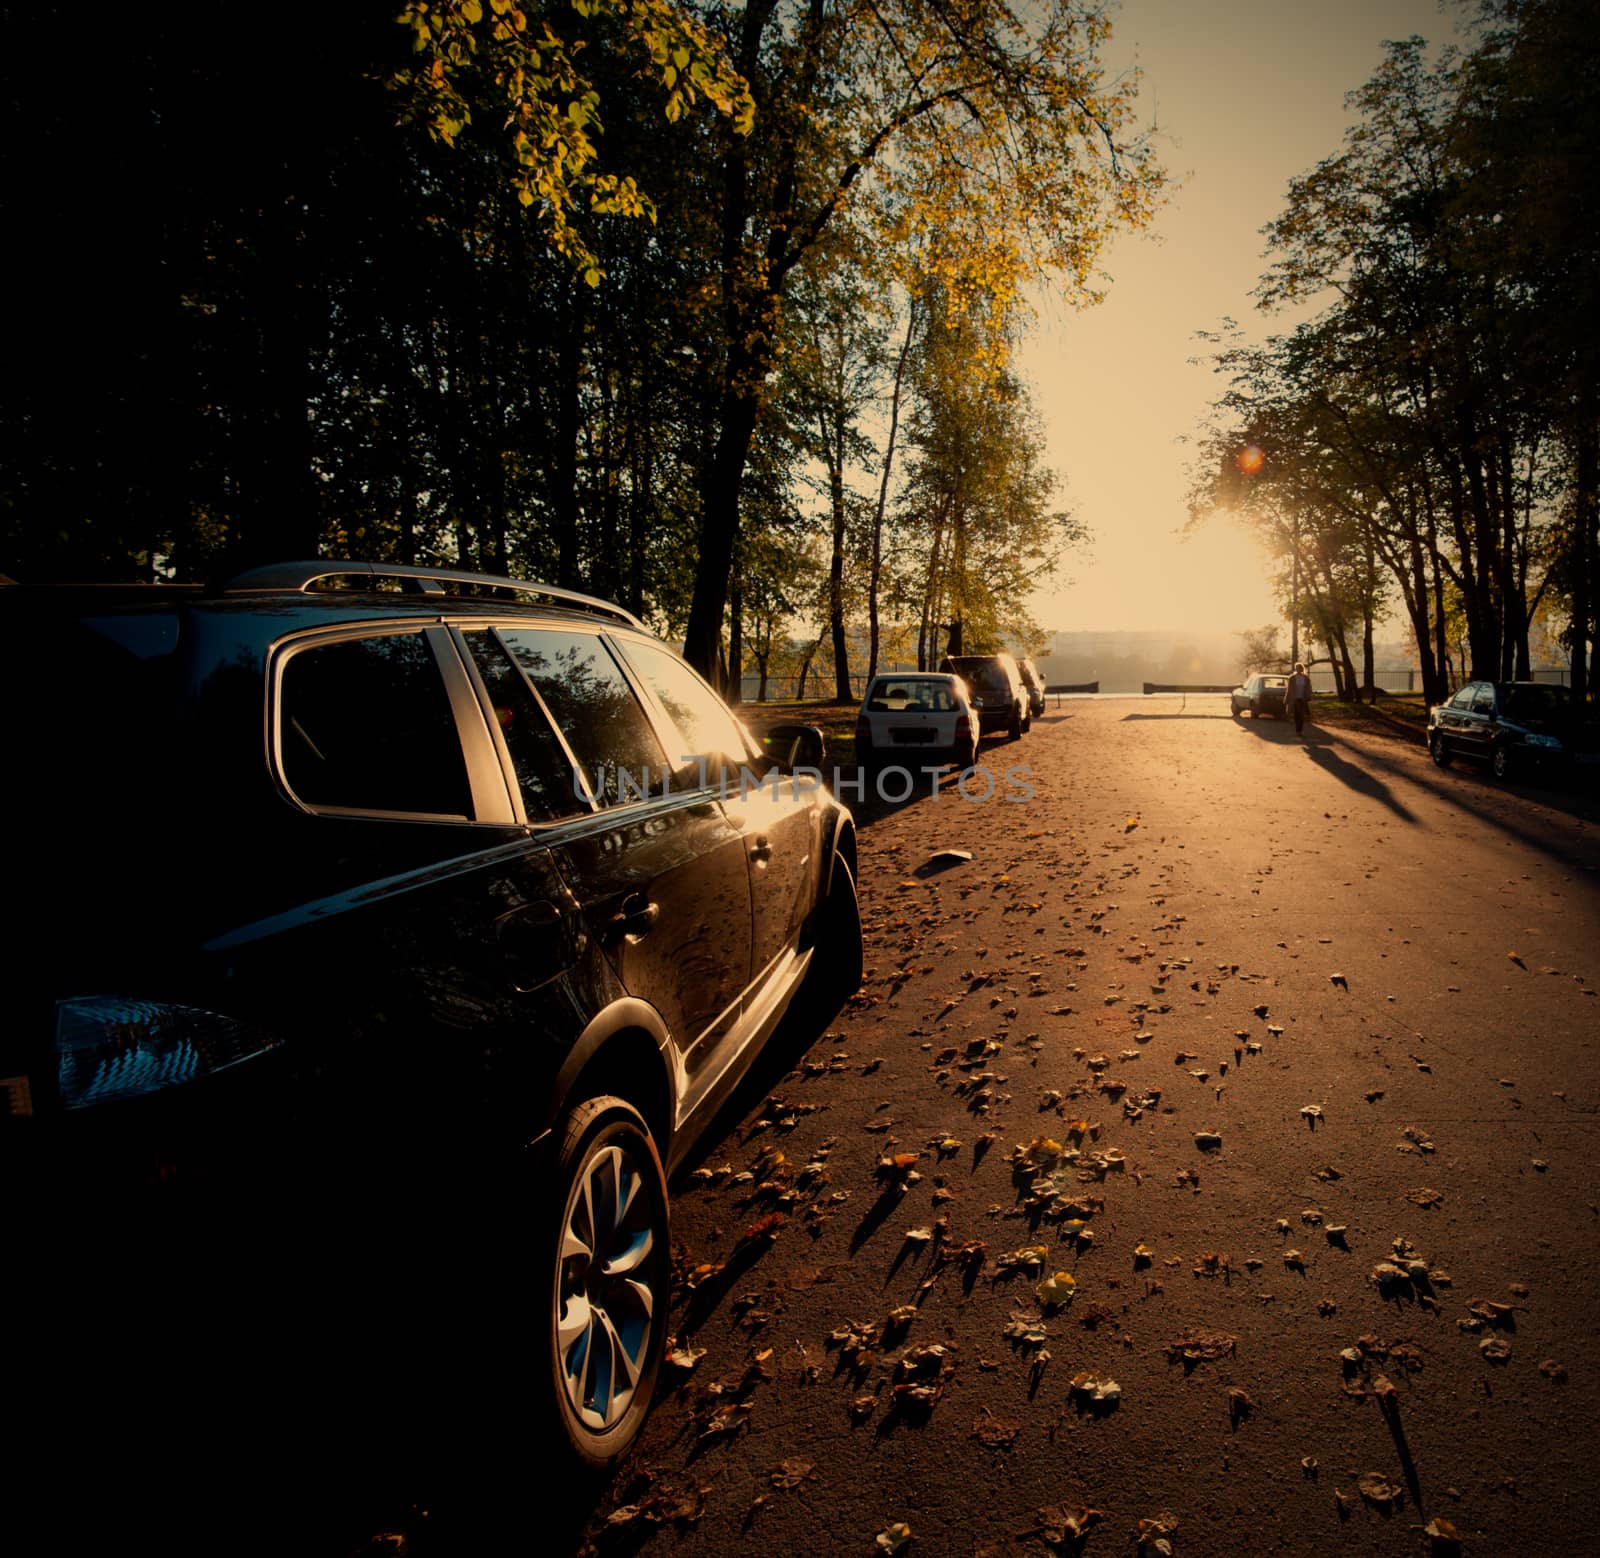 black car autumn evening in the moscow park, instagram image style